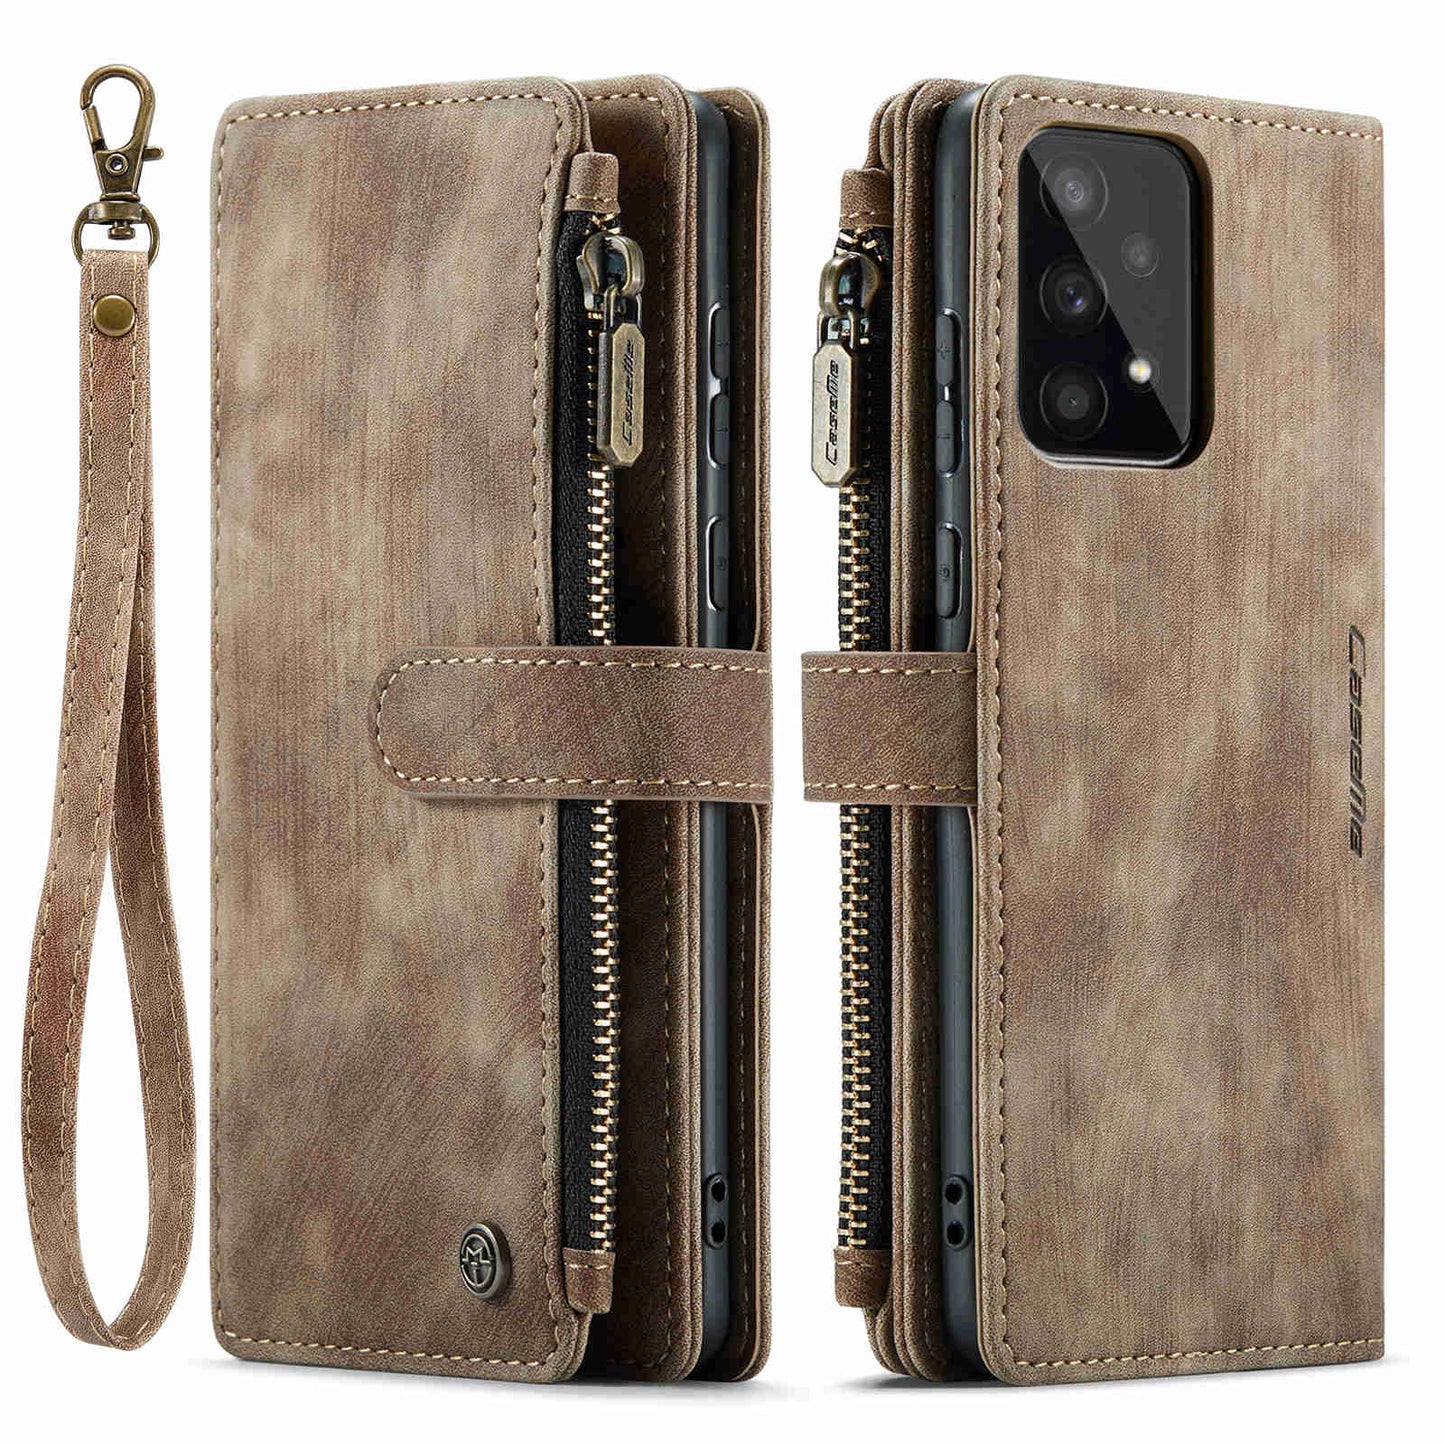 Suede Vintage Leather Cover Phone case